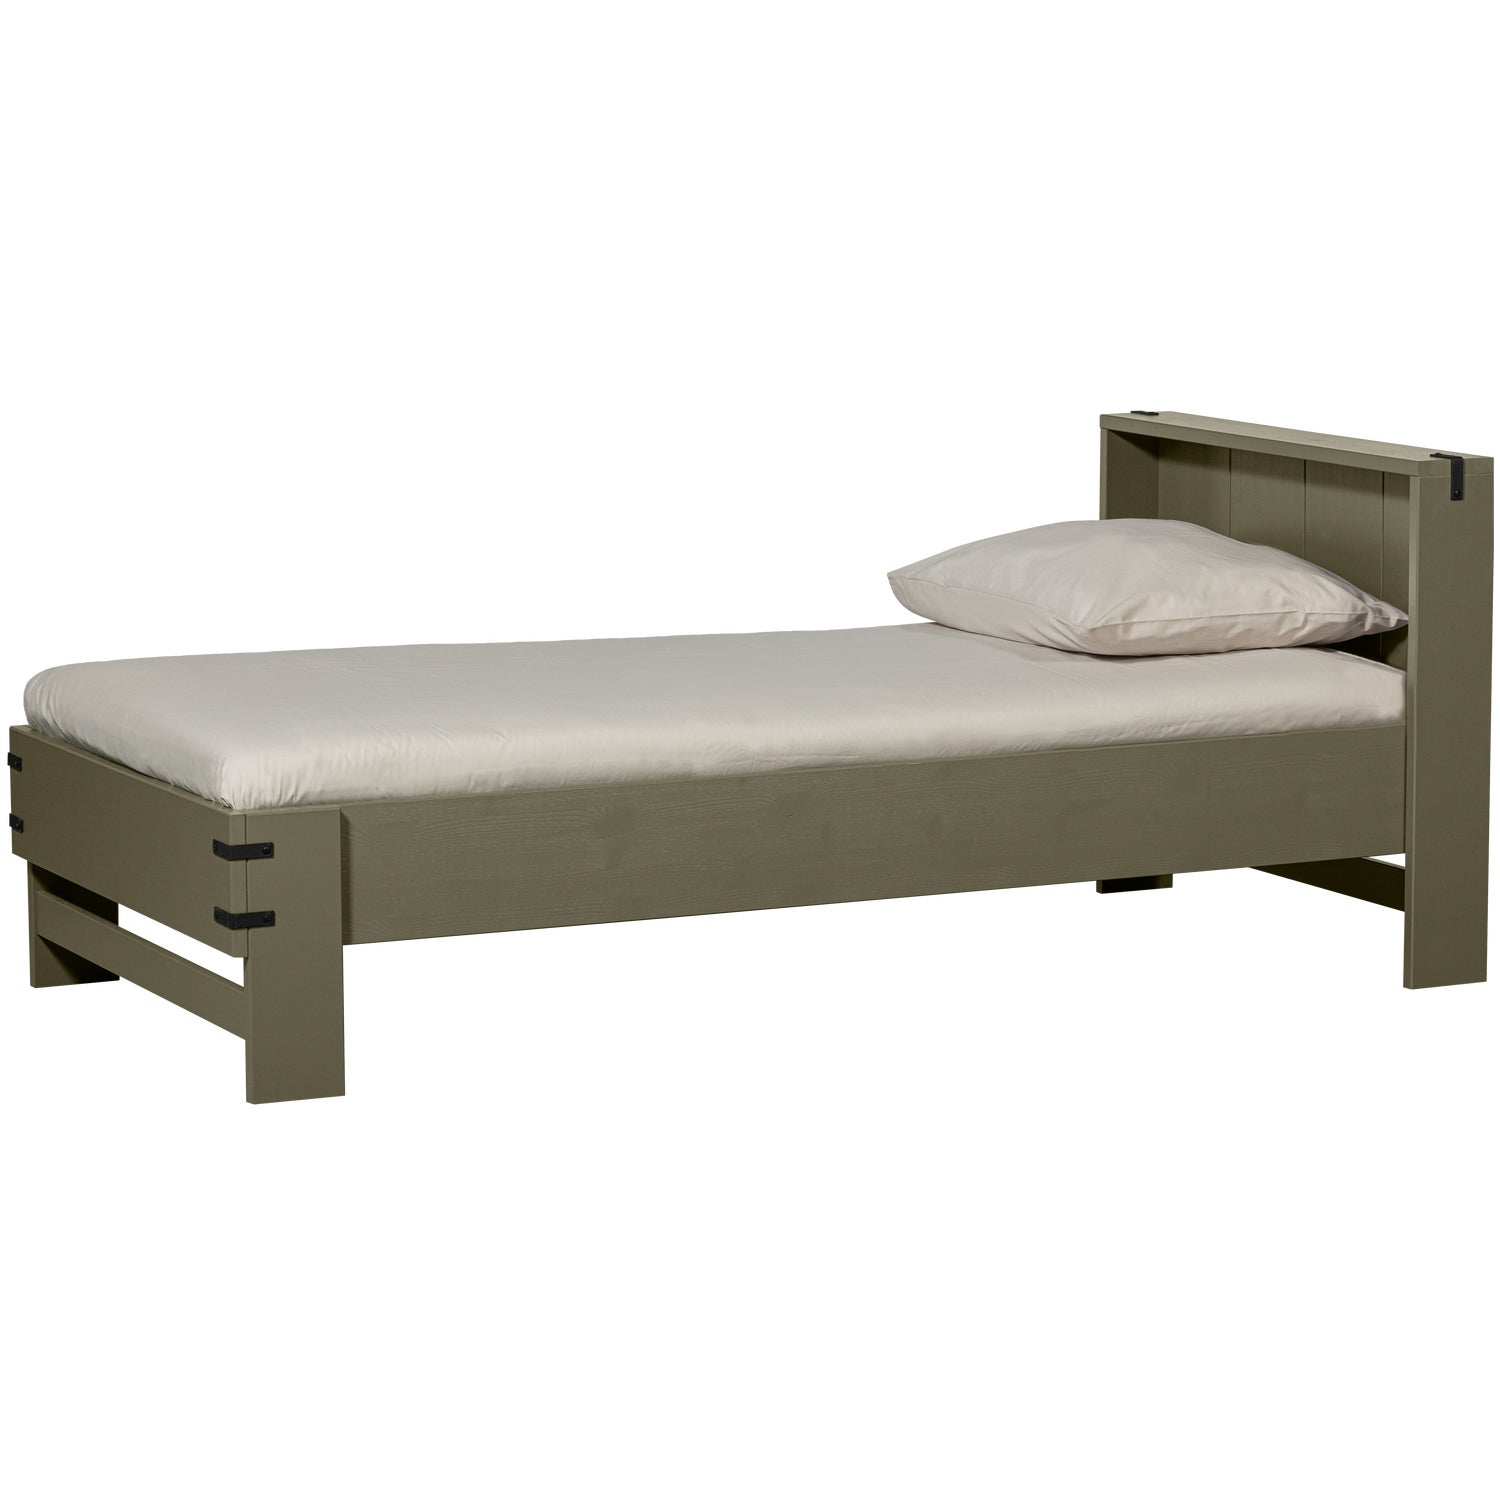 374066-F-01_VS_FA_Bobby_bed_grenen_forrest_200x90cm_SA.png?auto=webp&format=png&width=1500&height=1500